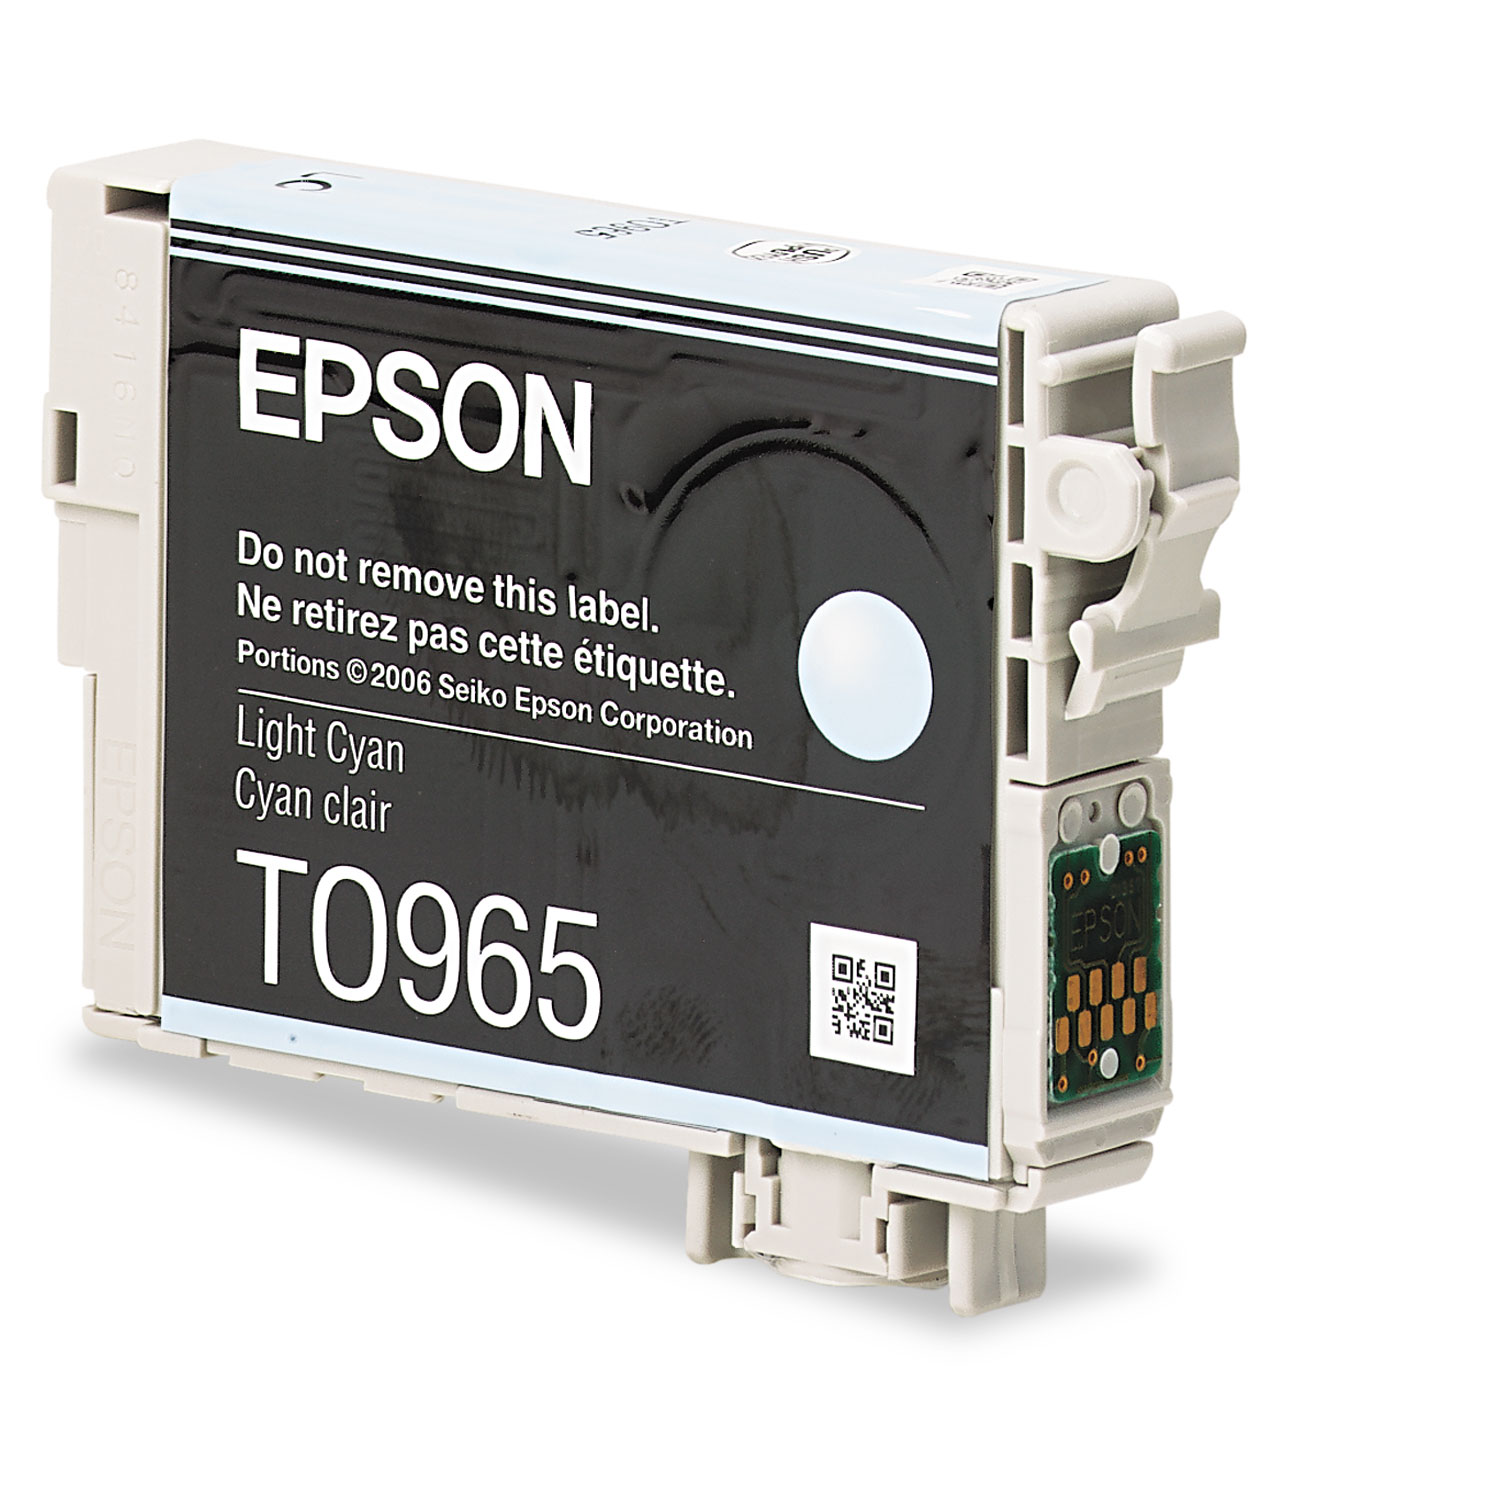  Epson T096520 T096520 (96) Ink, 430 Page-Yield, Light Cyan (EPST096520) 